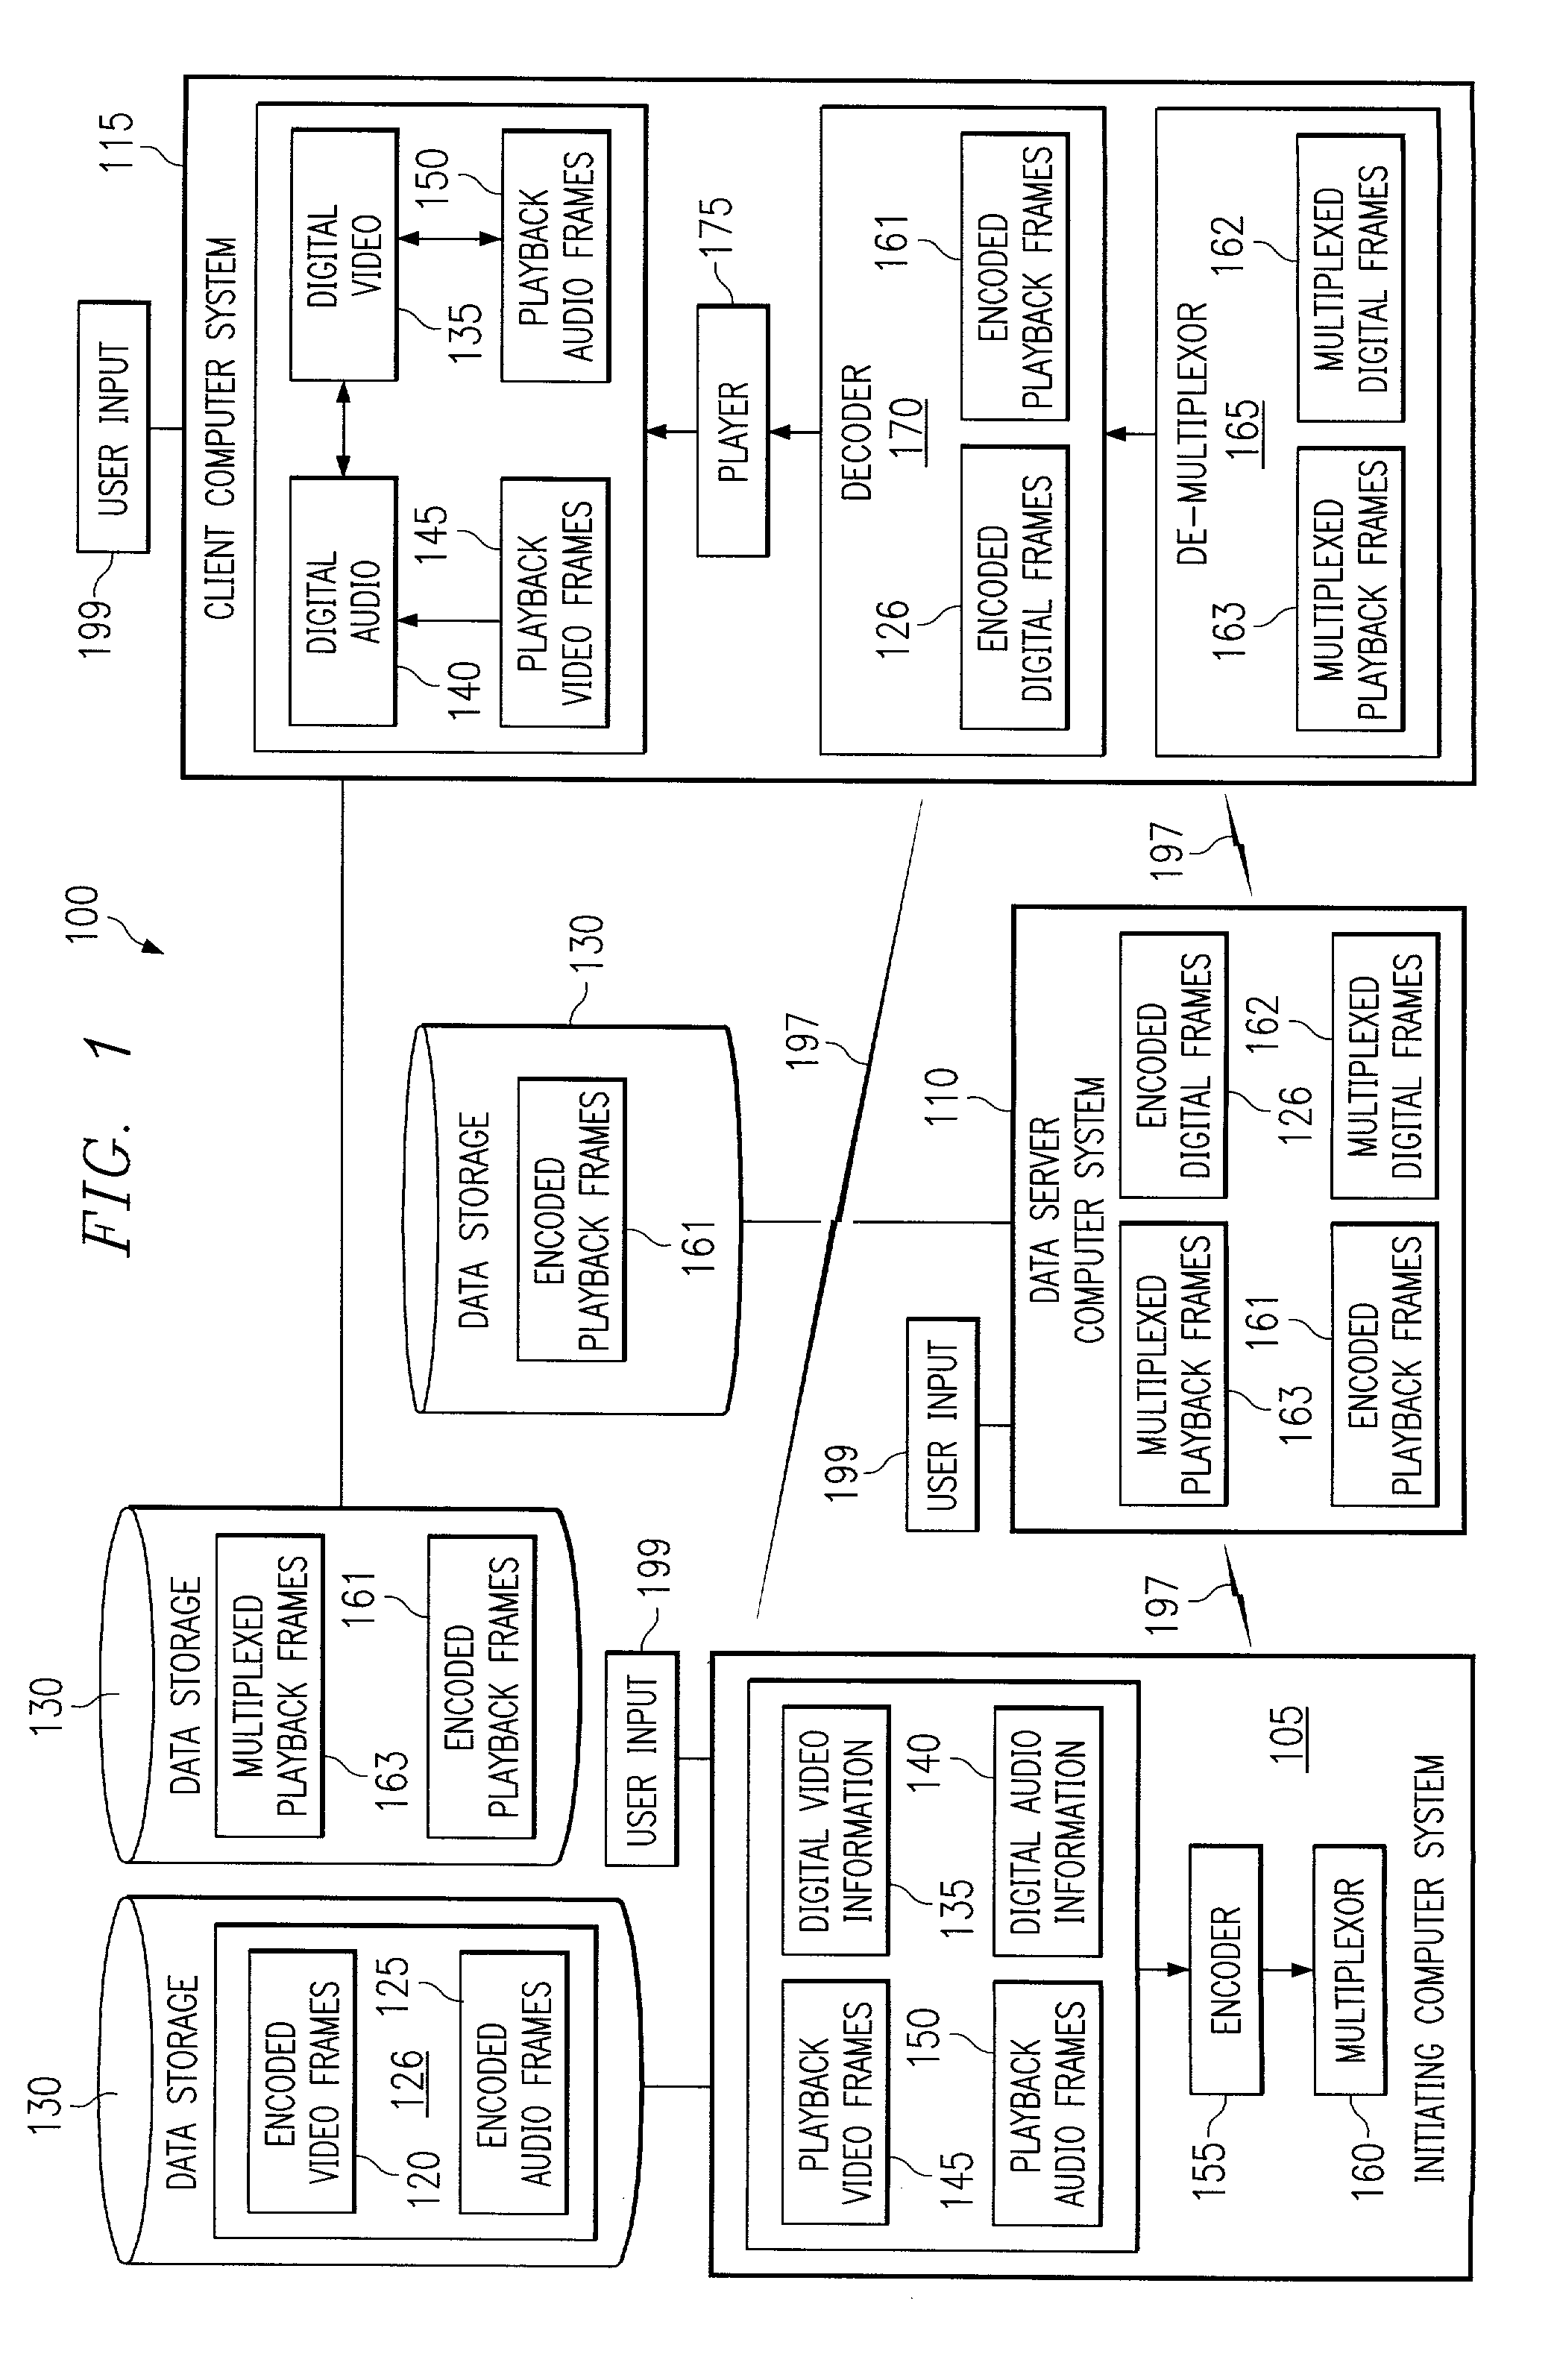 Methods to facilitate efficient transmission and playback of digital information